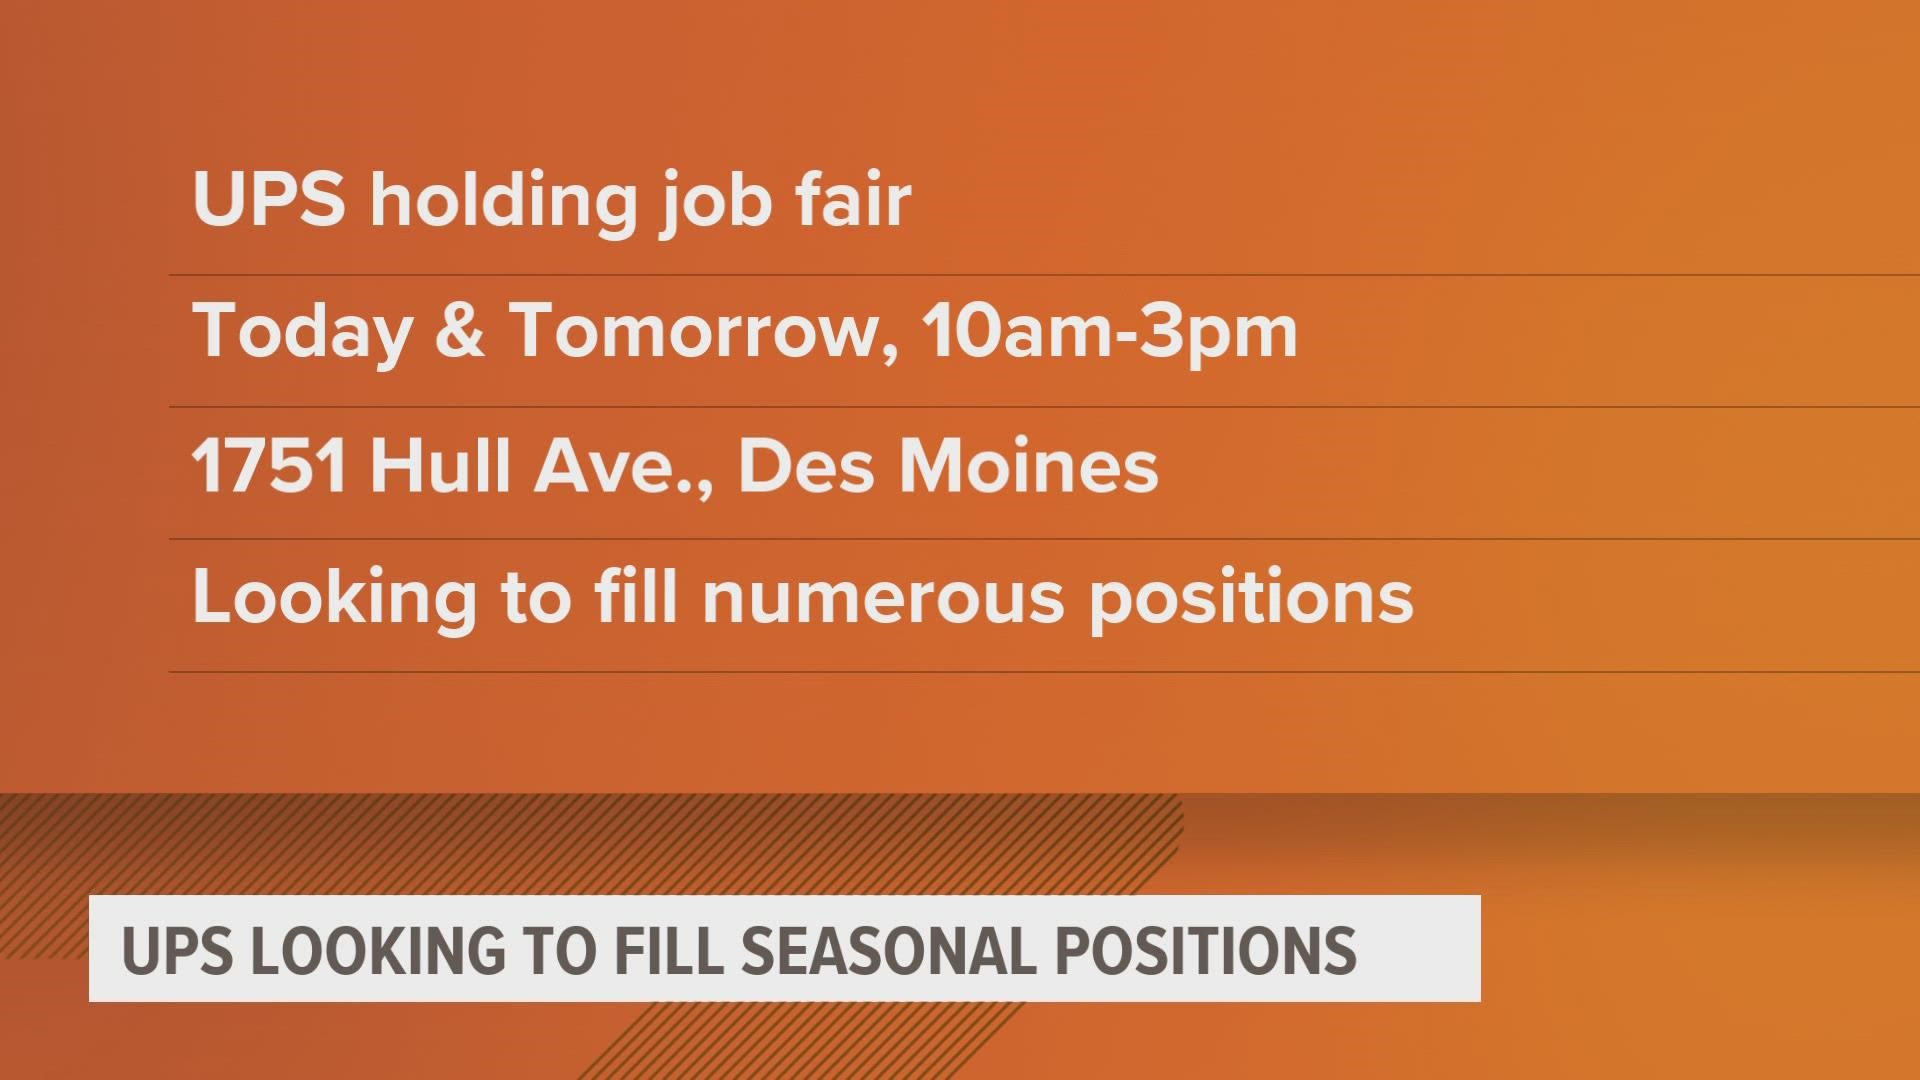 The job fair will run from 10 a.m. to 3 p.m. today and tomorrow at the UPS customer center on Hull Avenue in Des Moines.